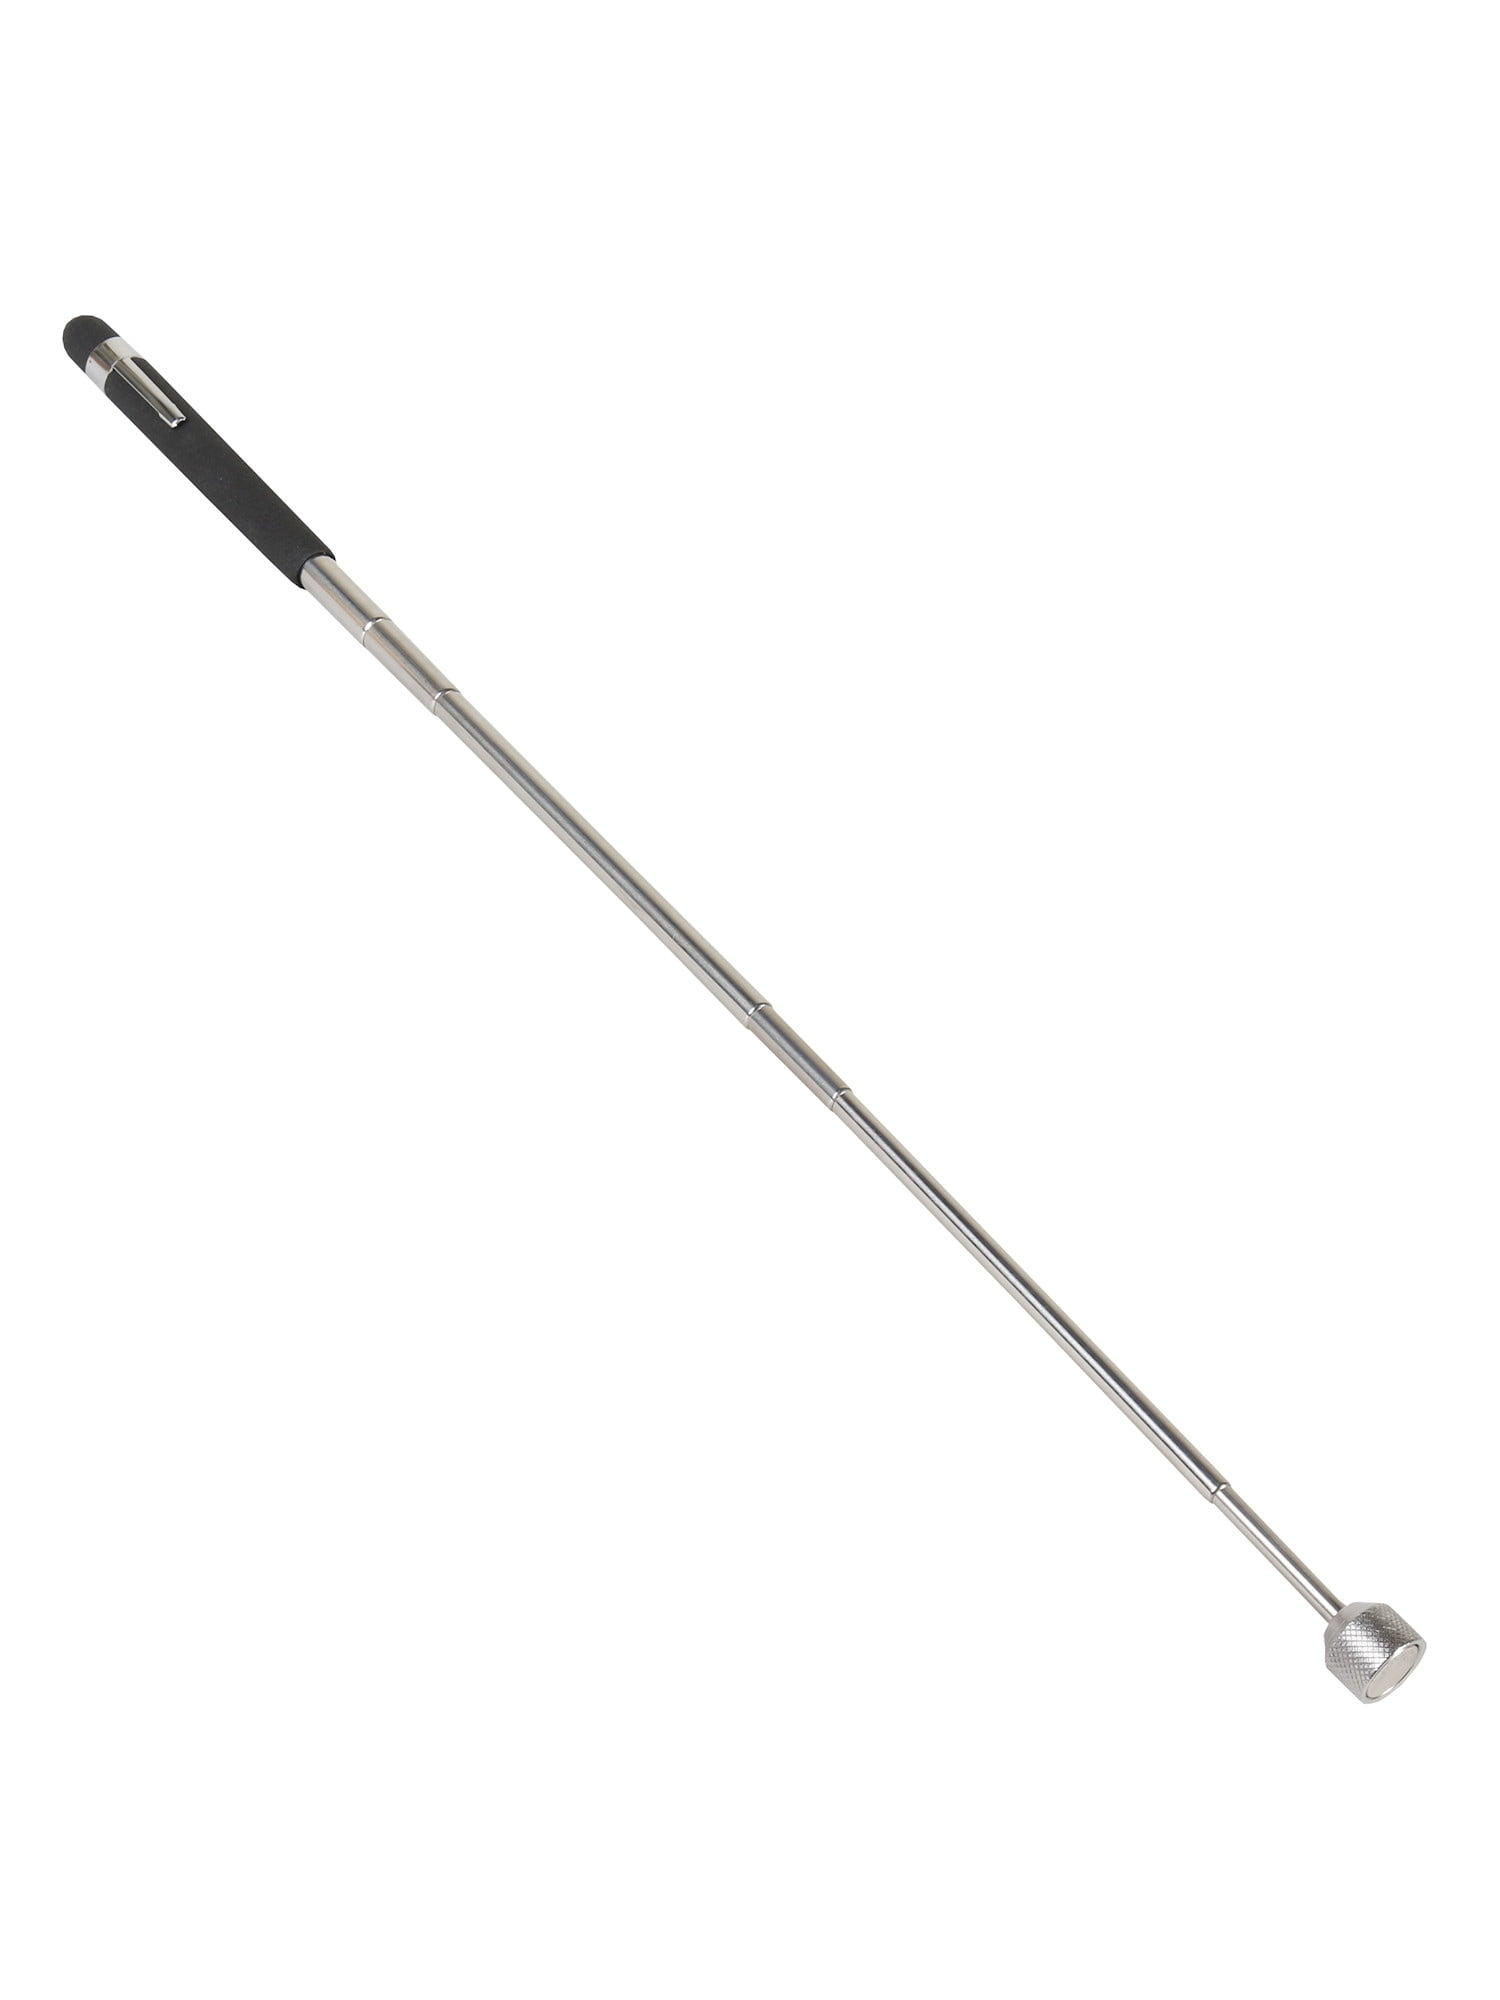 Silverline 253184 Flexible Magnetic Pick-up Tool 600mm for sale online 